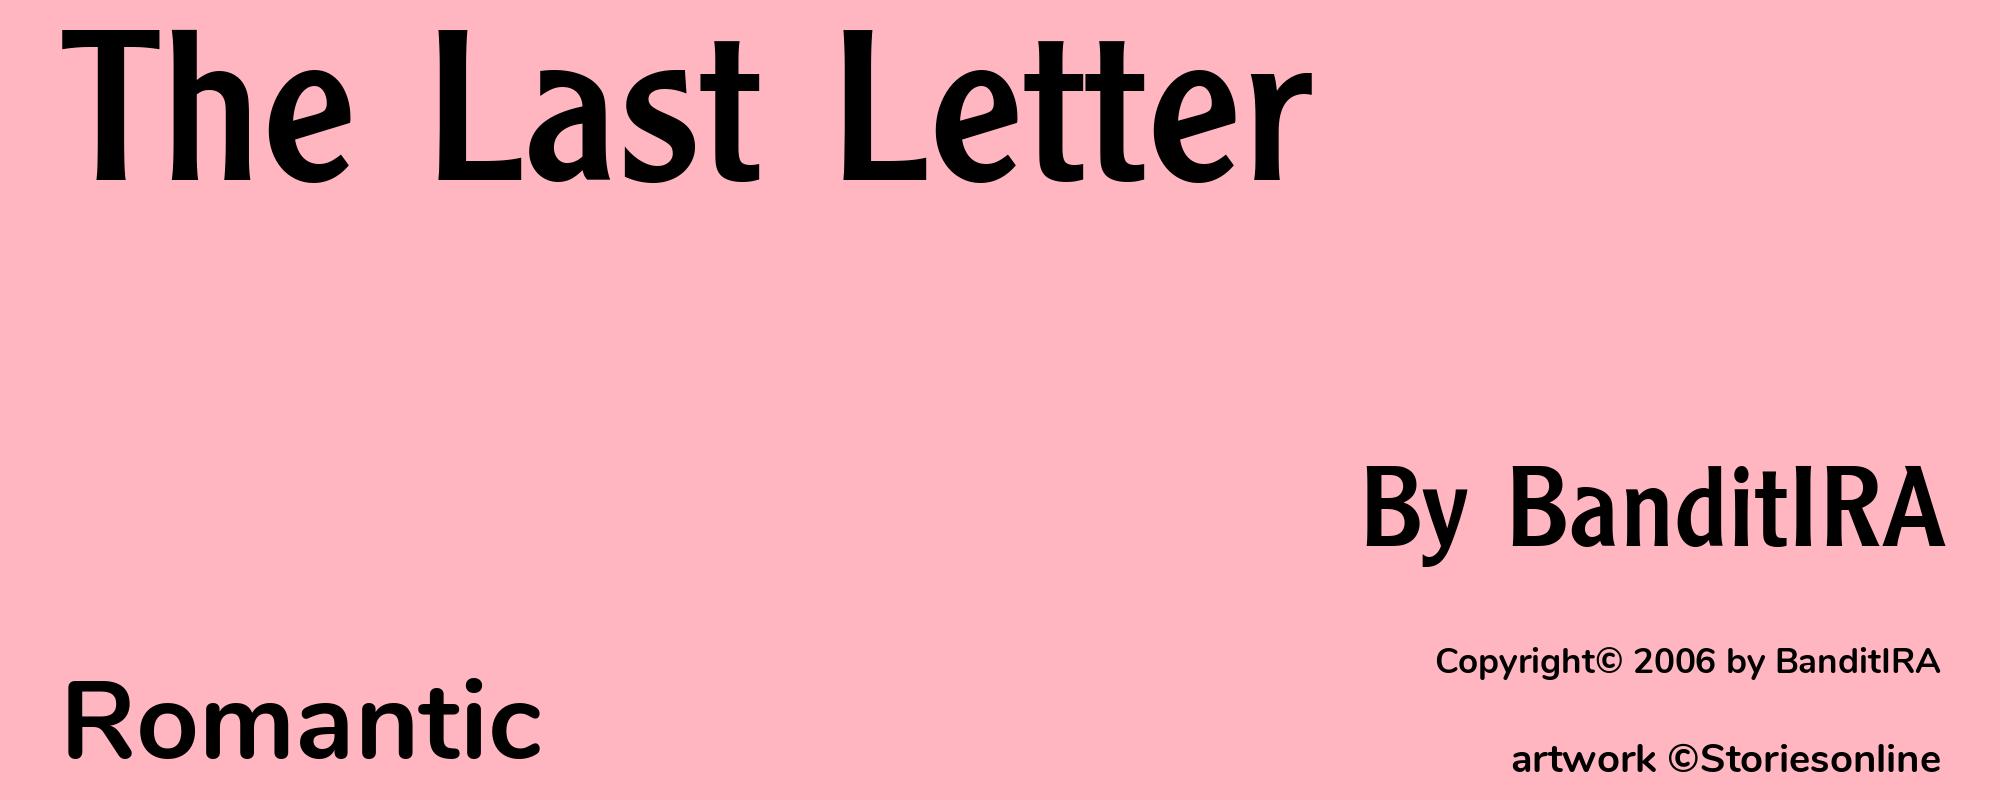 The Last Letter - Cover